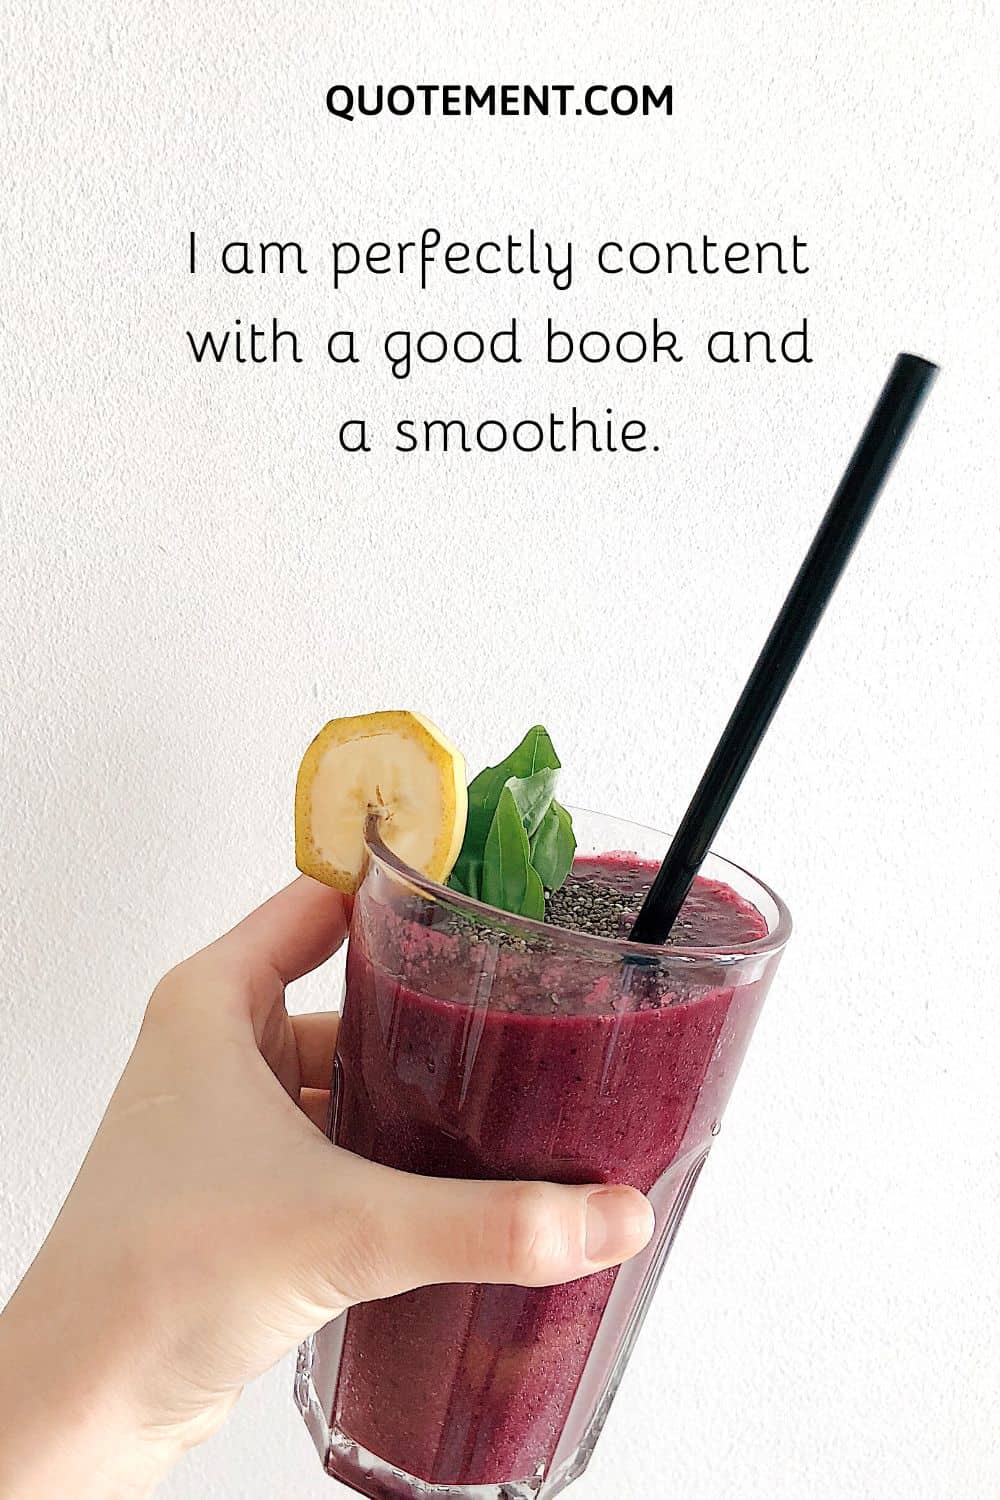 I am perfectly content with a good book and a smoothie.